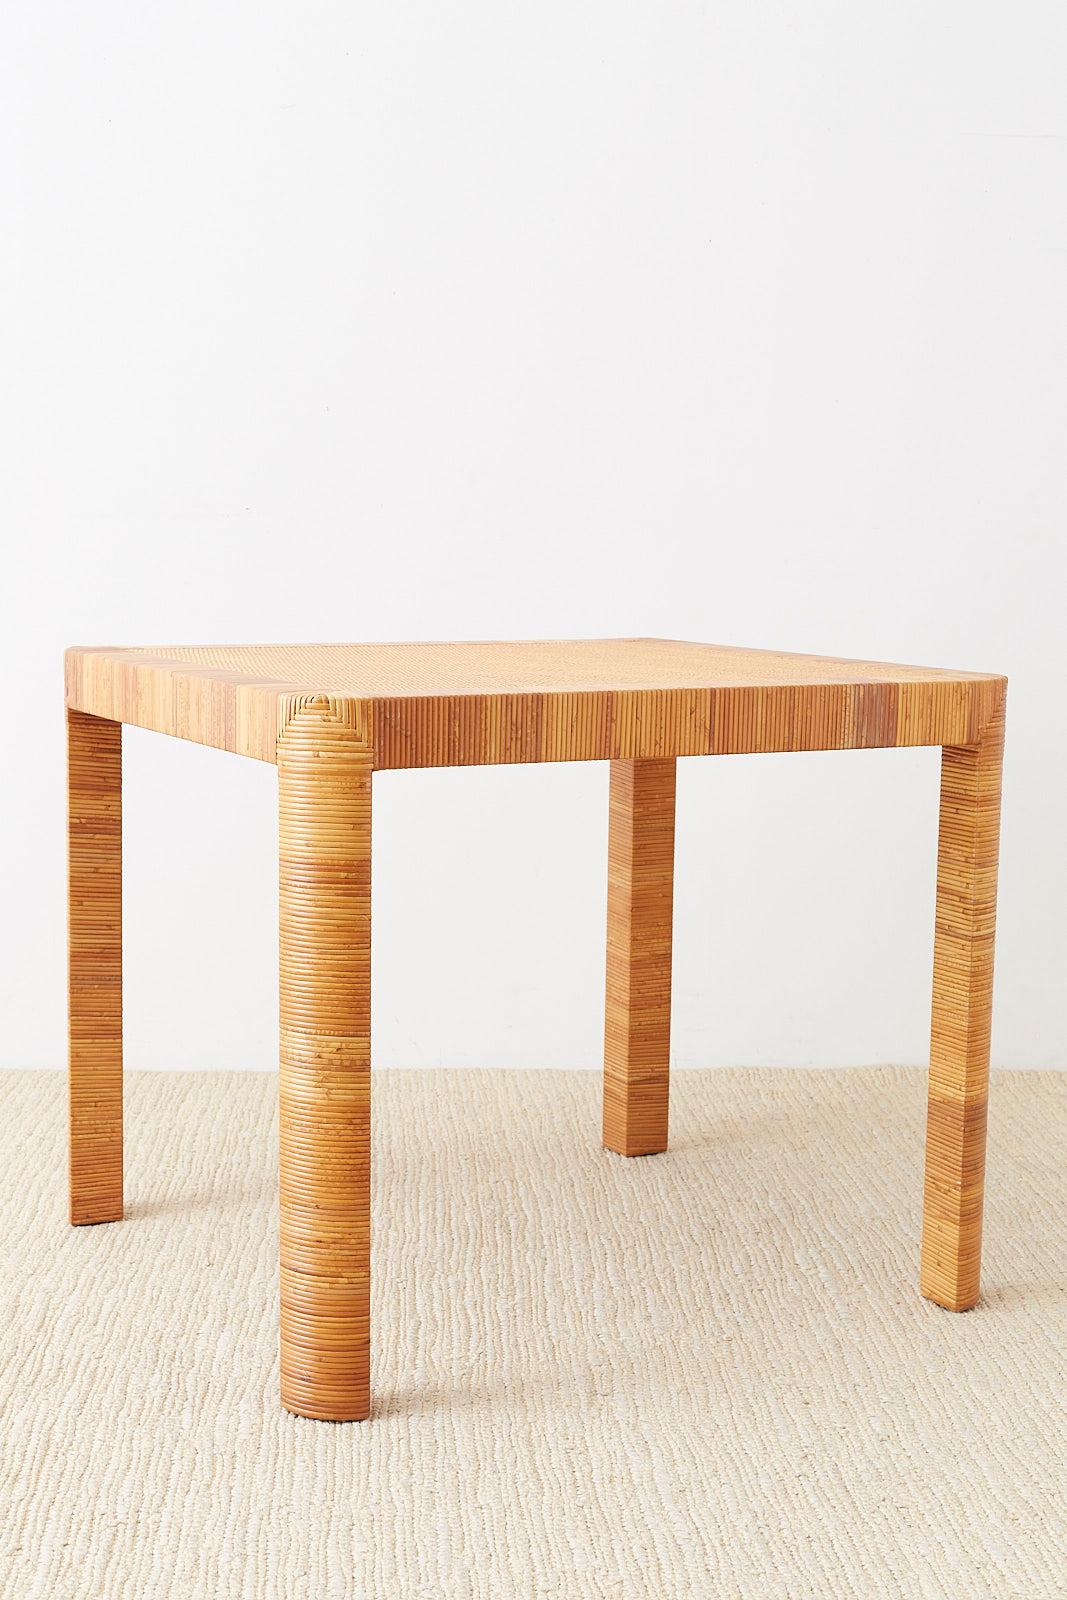 Bielecky Bamboo and Rattan Basket Weave Dining Breakfast Table 6